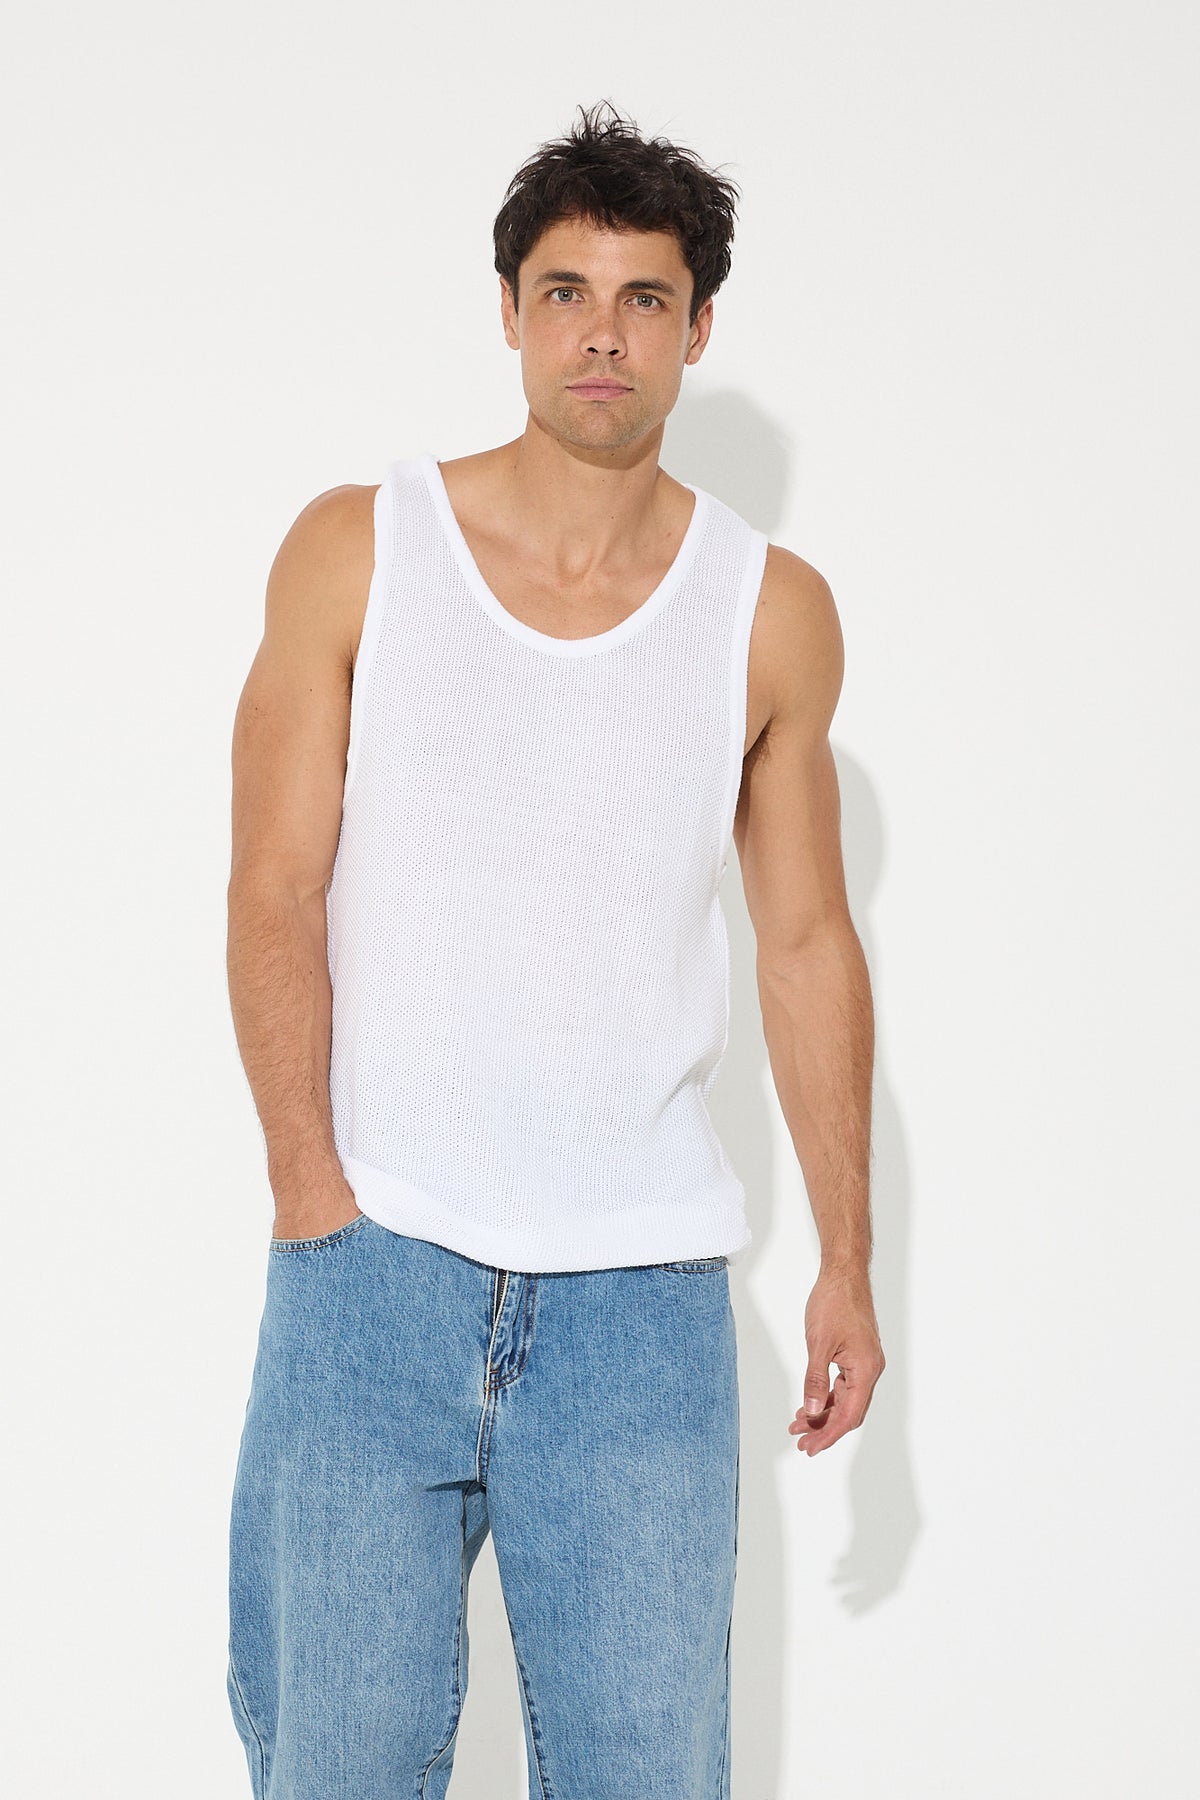 NTH Knitted Tank White - FINAL SALE